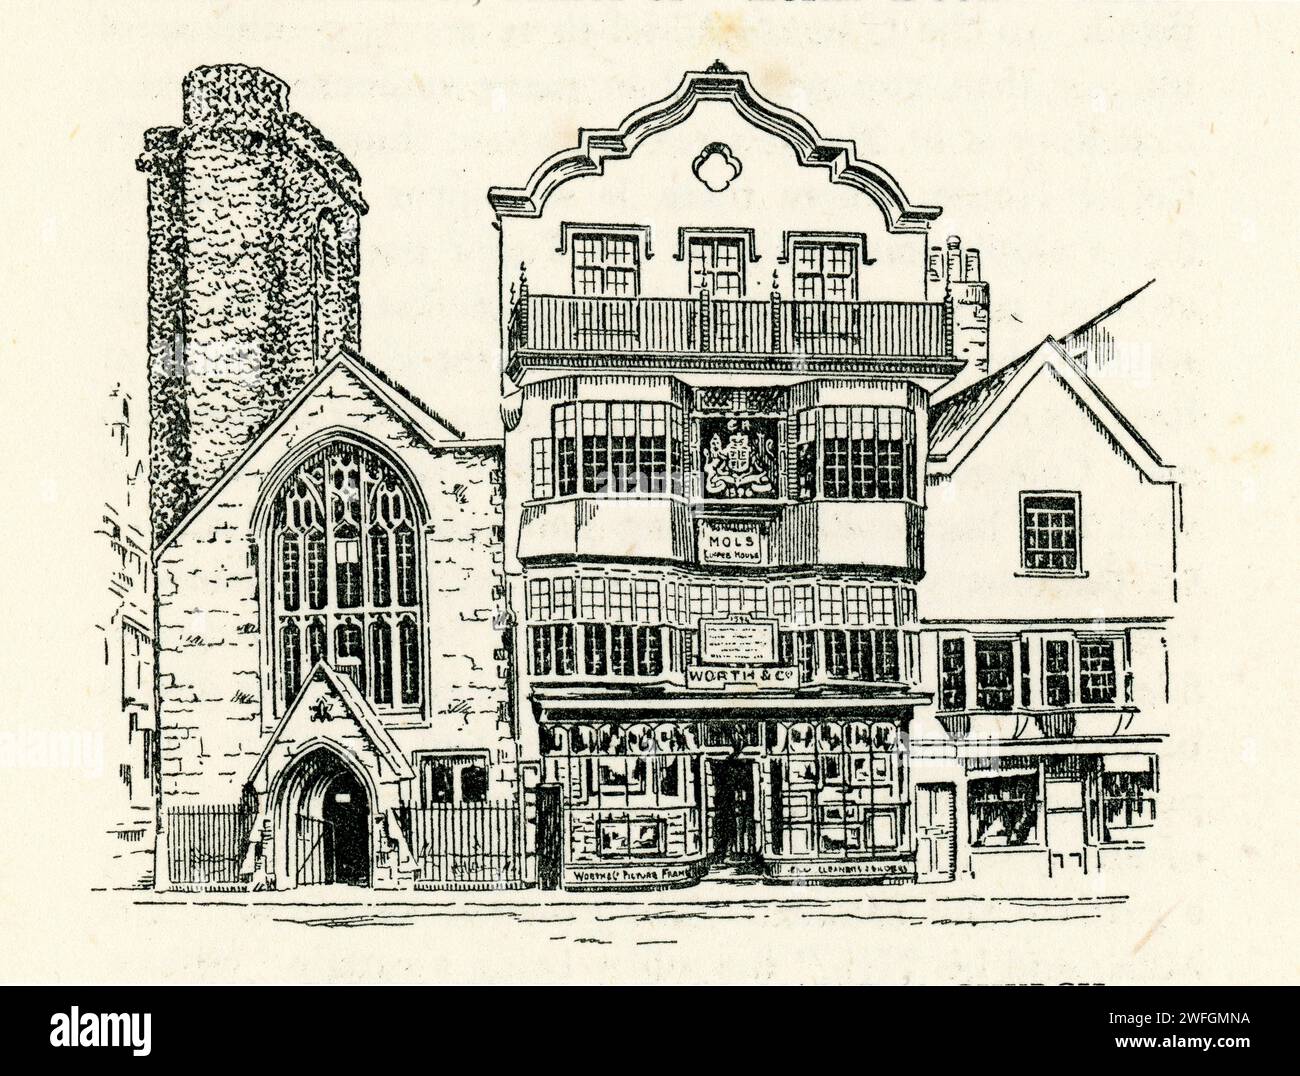 Pen and Ink drawong of Mol's coffee House, Exeter From the book Glorious Devon.  by S.P.B. Mais, published by London Great Western Railway Company, 1928 Stock Photo